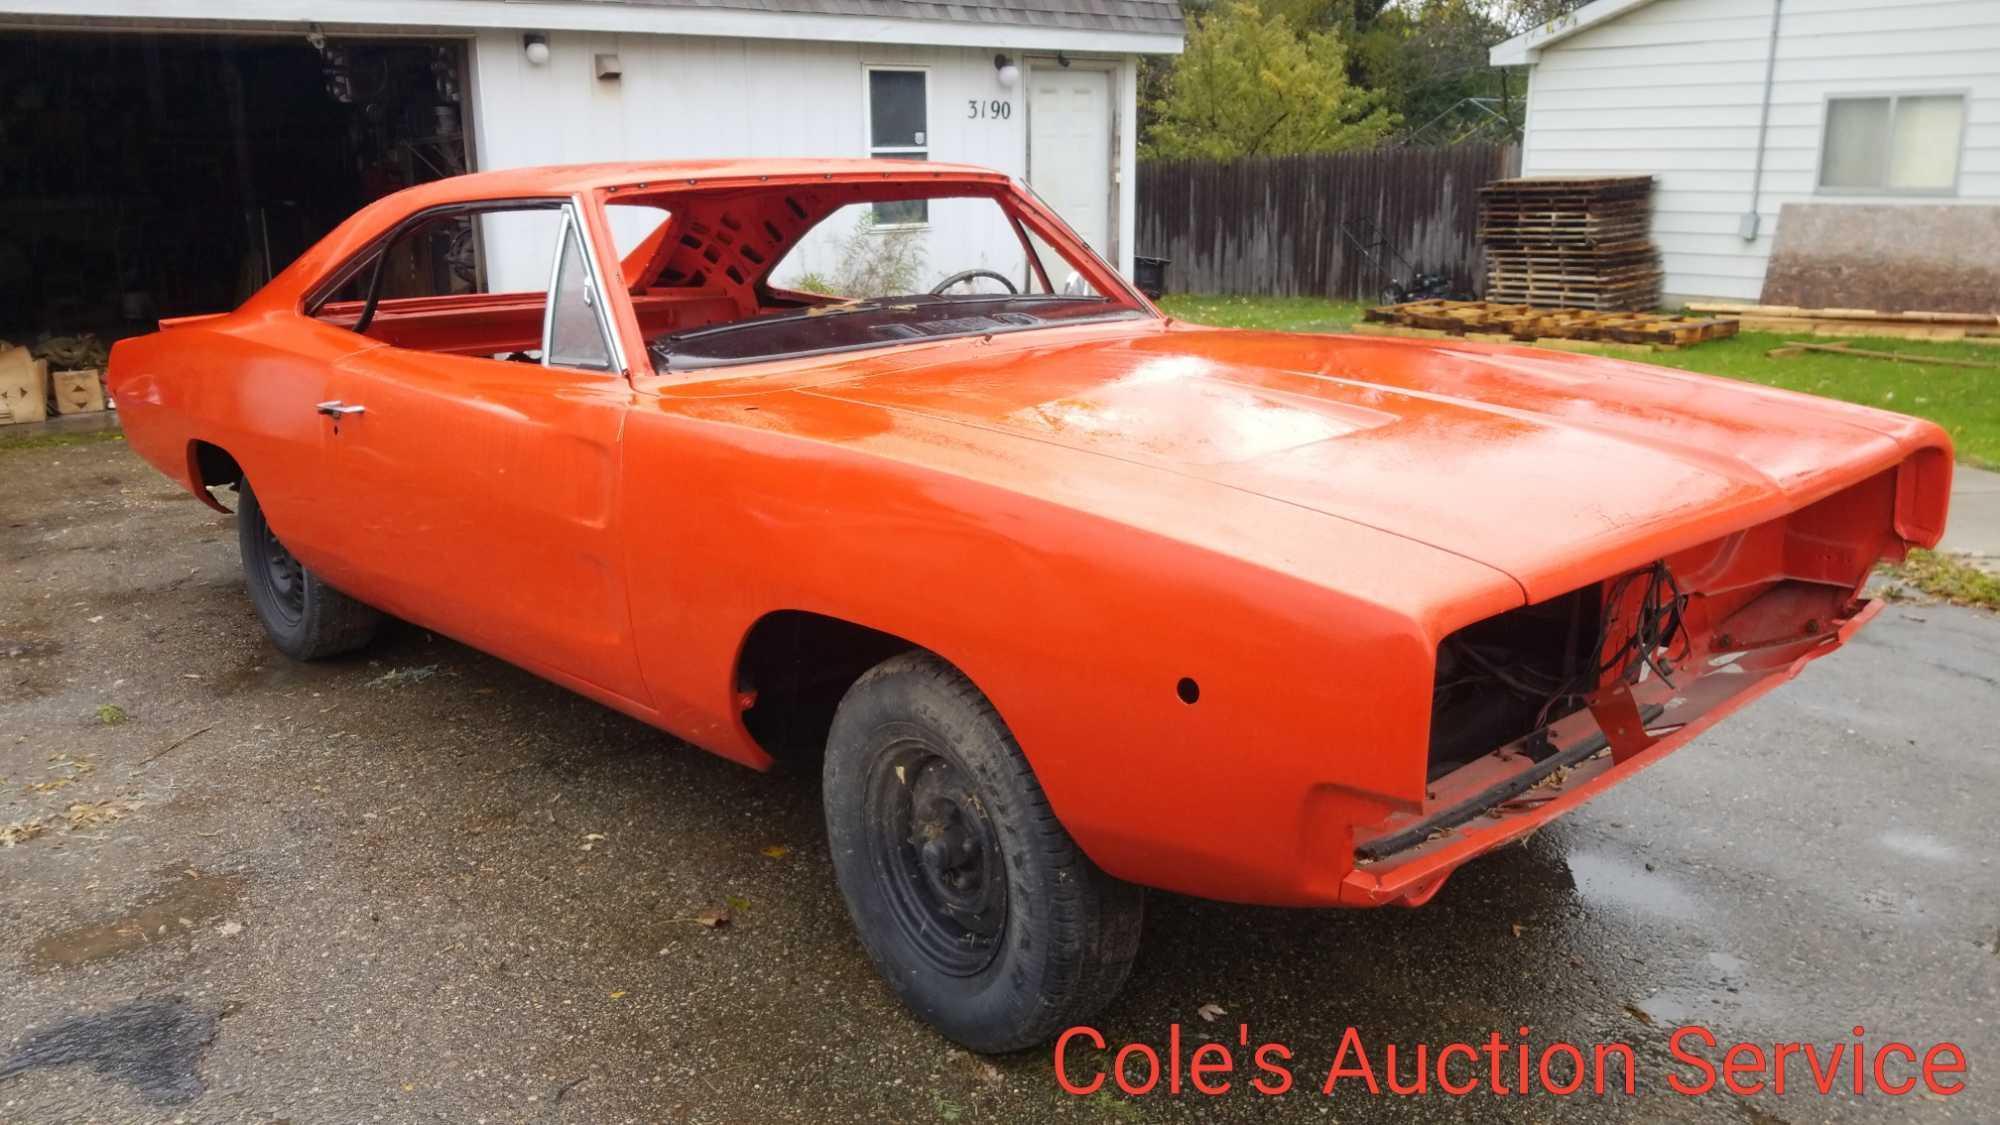 Rare 1968 Dodge Charger "Dukes of Hazard". Professional restoration has started and just needs to be